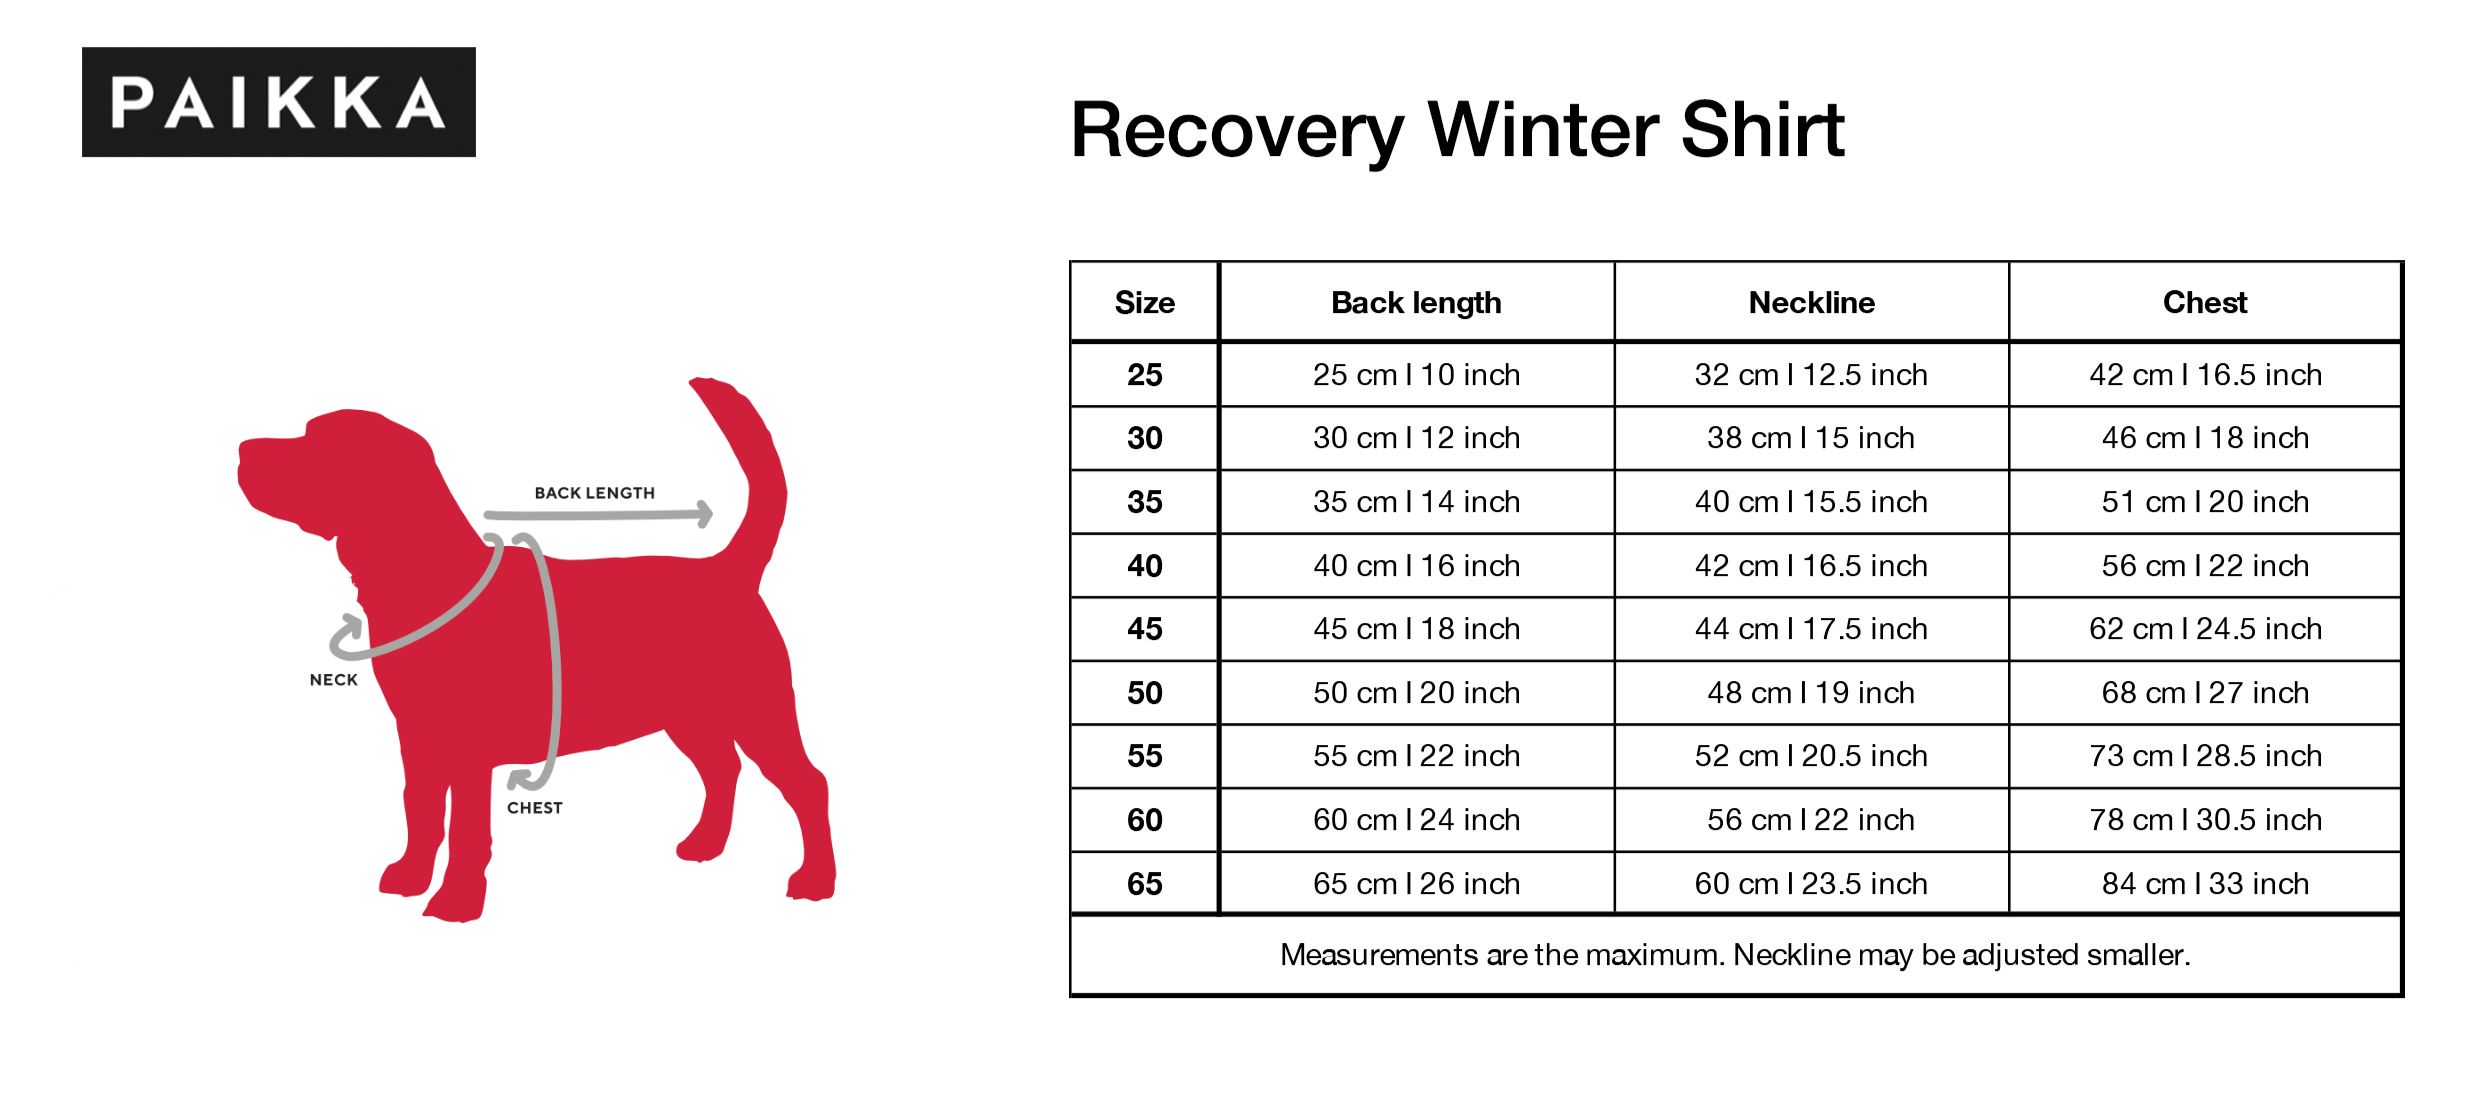 Size guide for Paikka Recovery Winter Shirt